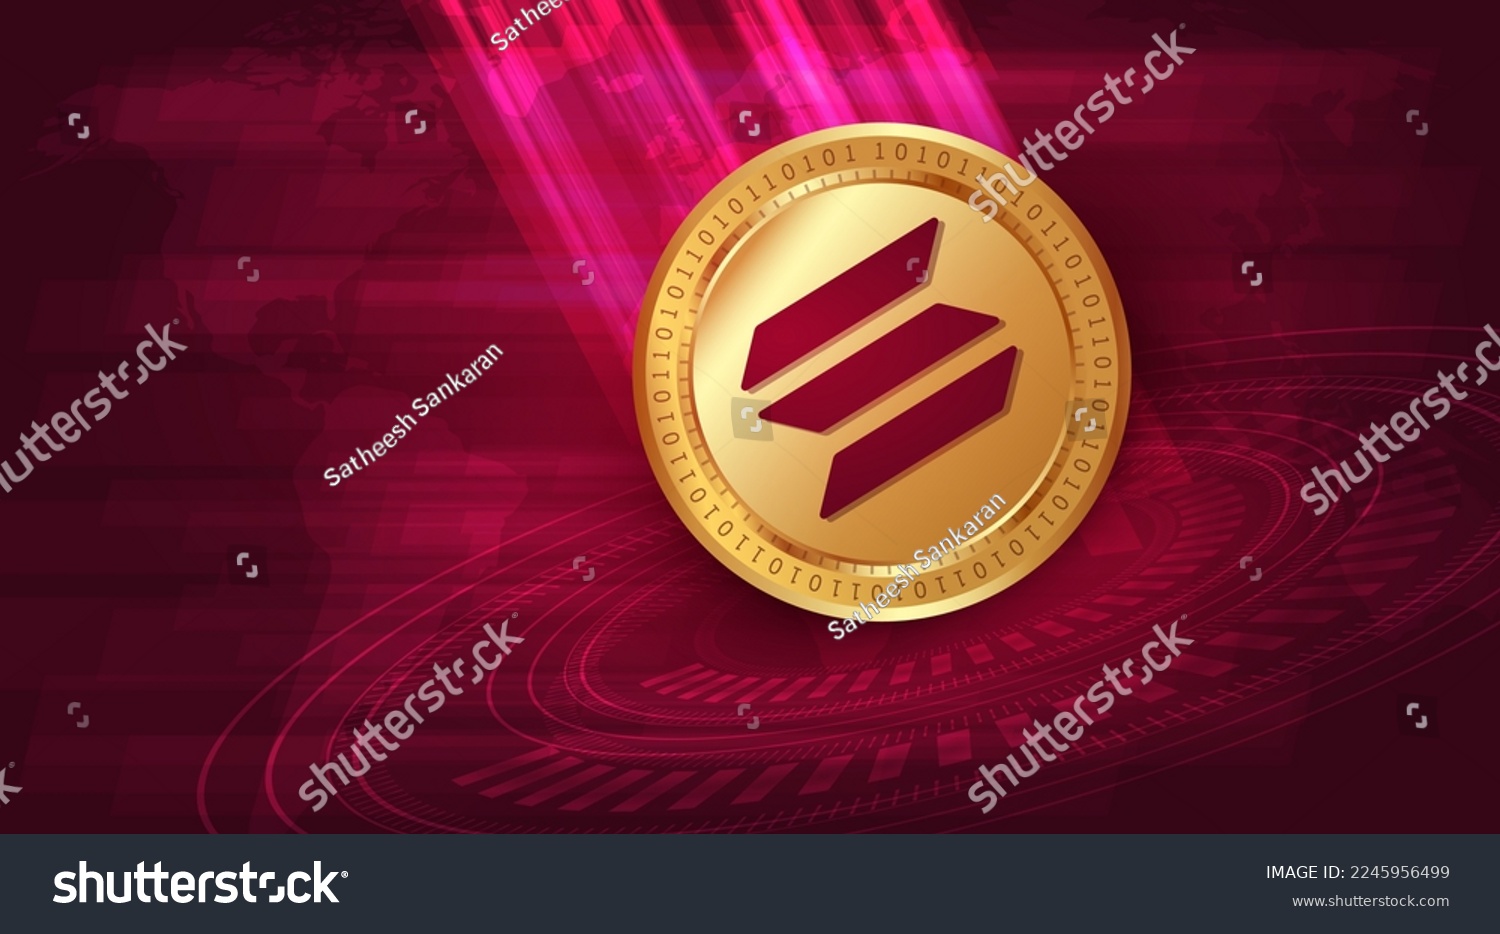 SVG of Solana (SOL) crypto currency banner and background svg